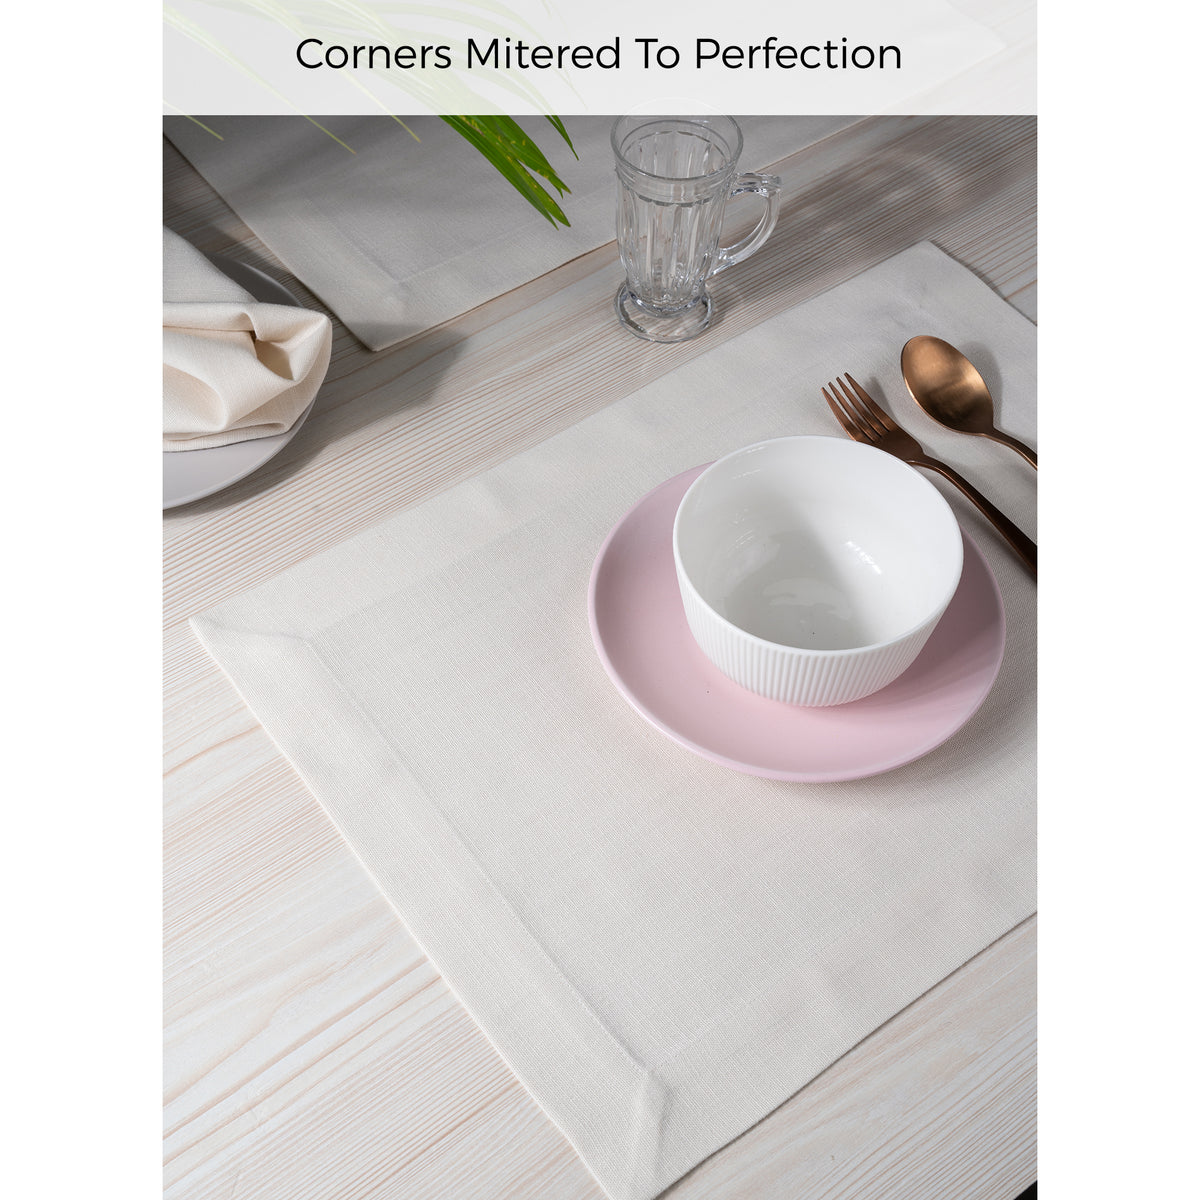 Ivory Linen Textured Placemats 14 x 19 Inch Set of 4 - Mitered Corner